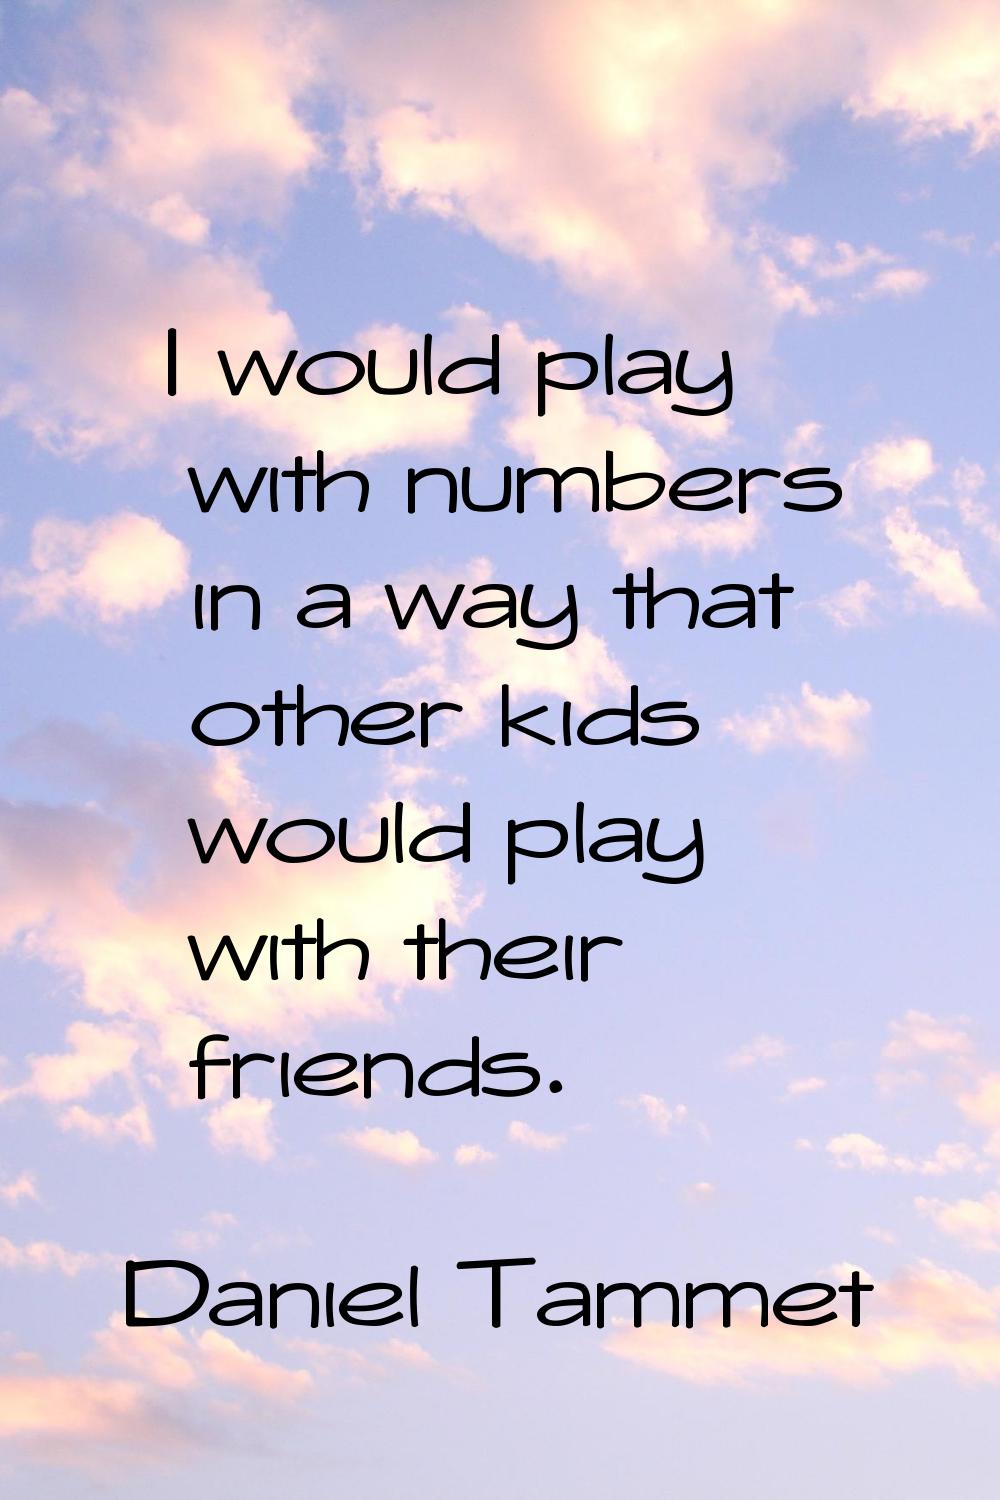 I would play with numbers in a way that other kids would play with their friends.